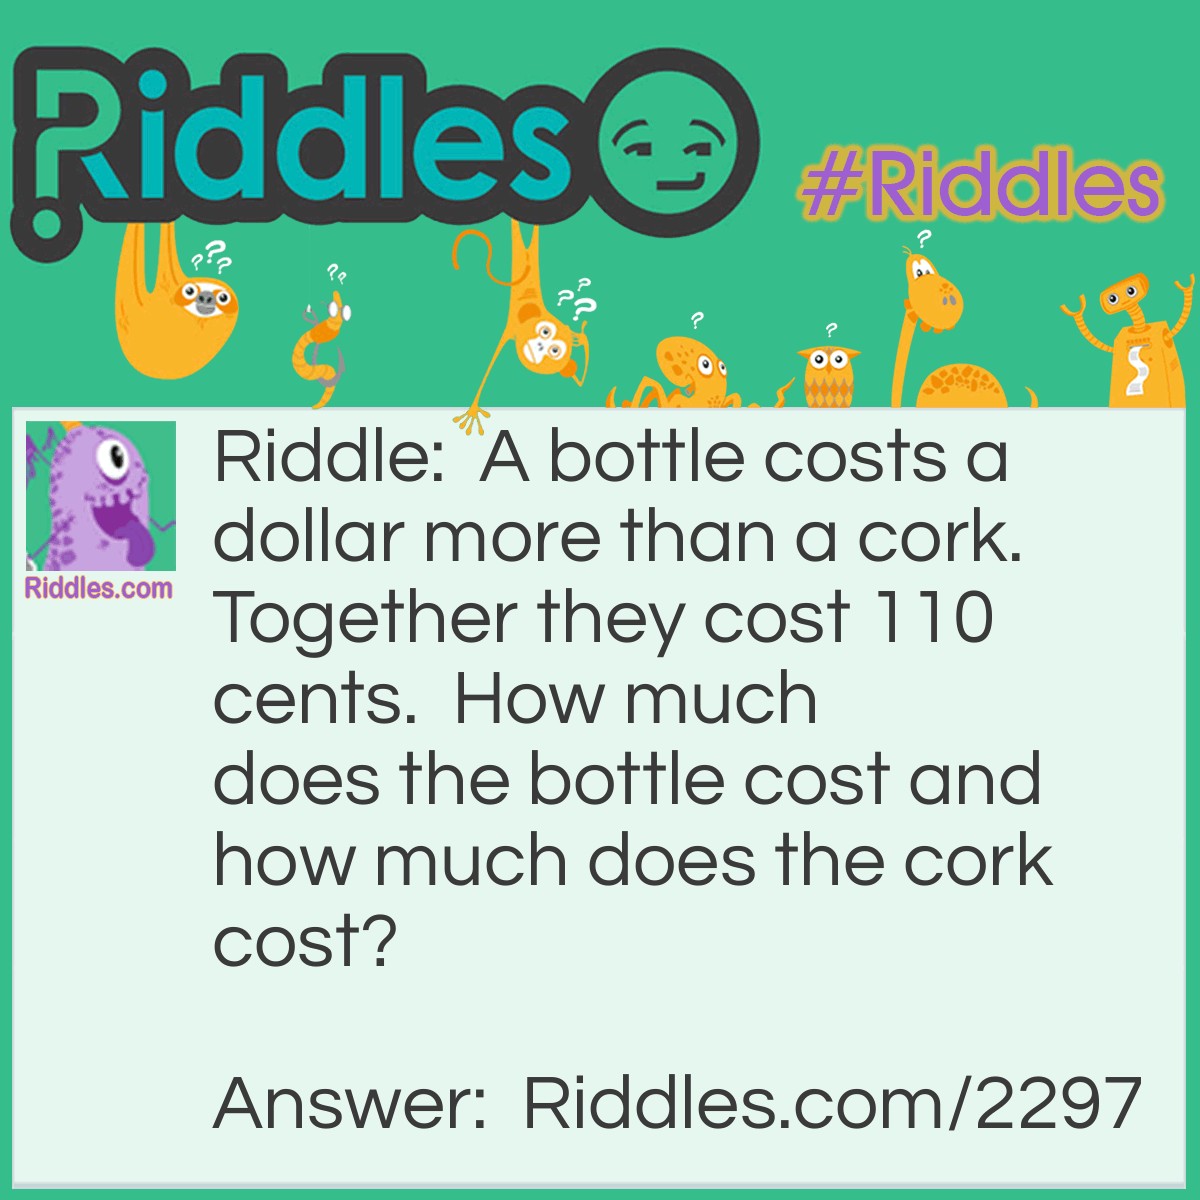 Riddle: A bottle costs a dollar more than a cork. Together they cost 110 cents.  How much does the bottle cost and how much does the cork cost? Answer: The right answer is that the bottle costs 105 cents, and the cork costs 5 cents.